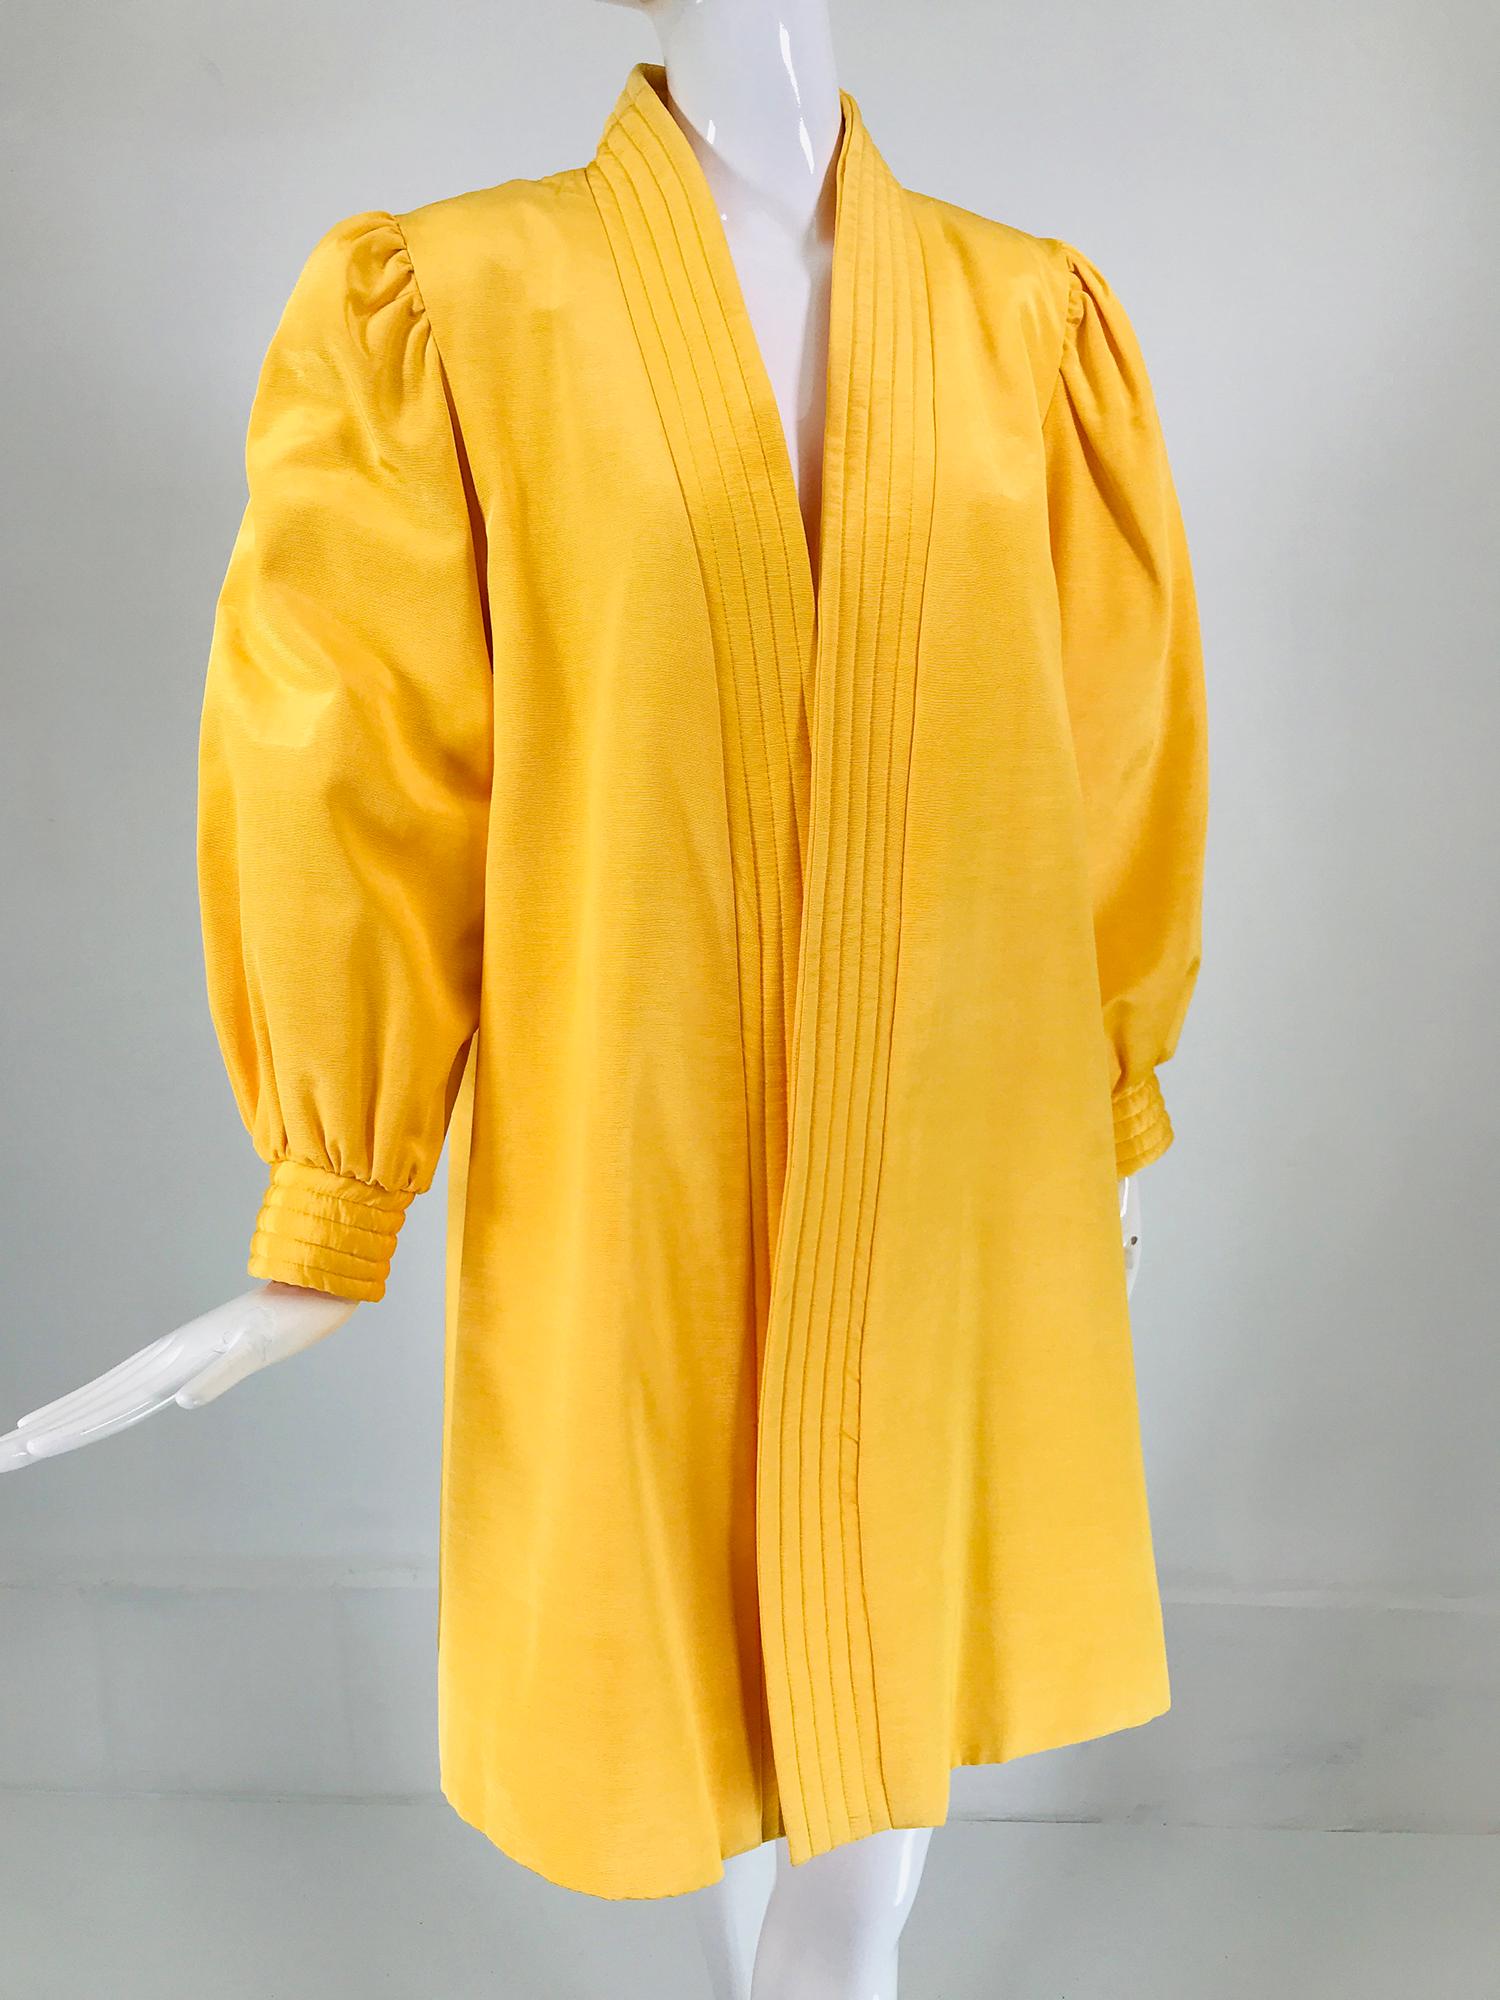 Victor Costa Mustard Yellow Faille Coat Quilted Facings & Cuffs 1980s For Sale 7